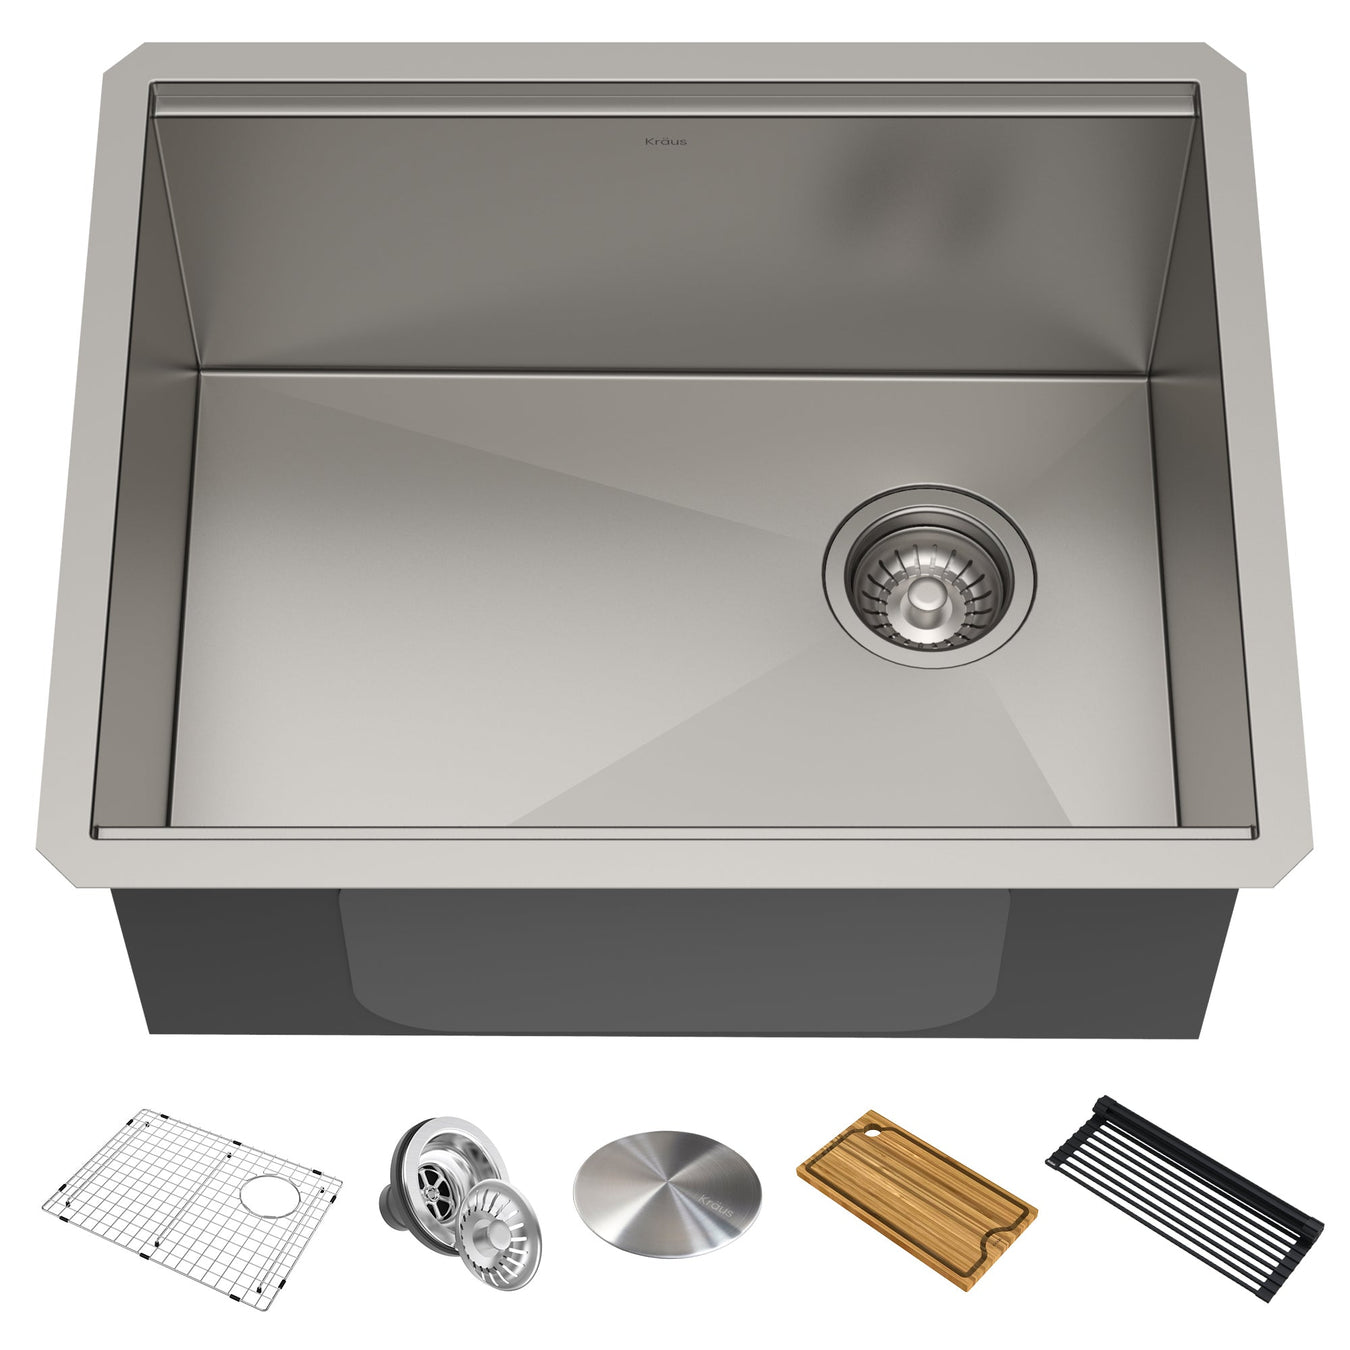 Biggest Undermount Sink for a 27" Cabinet